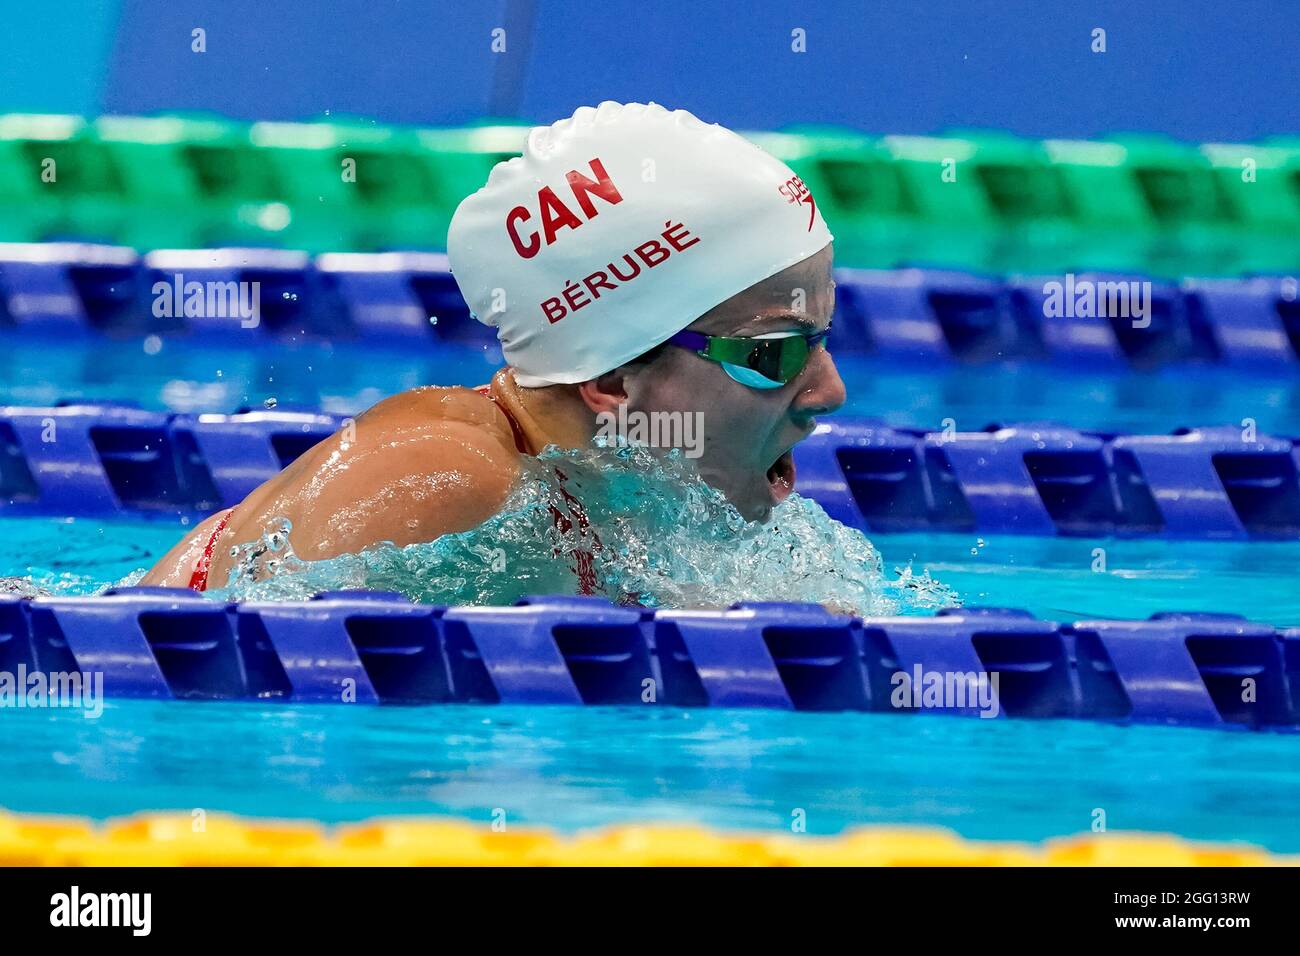 TOKYO, JAPAN - AUGUST 28: Camille Berube of Canada competing in the Women's 100m Breaststroke SB6 Heats during the Tokyo 2020 Paralympic Games at Tokyo Aquatics Centre on August 28, 2021 in Tokyo, Japan (Photo by Ilse Schaffers/Orange Pictures) NOCNSF Stock Photo